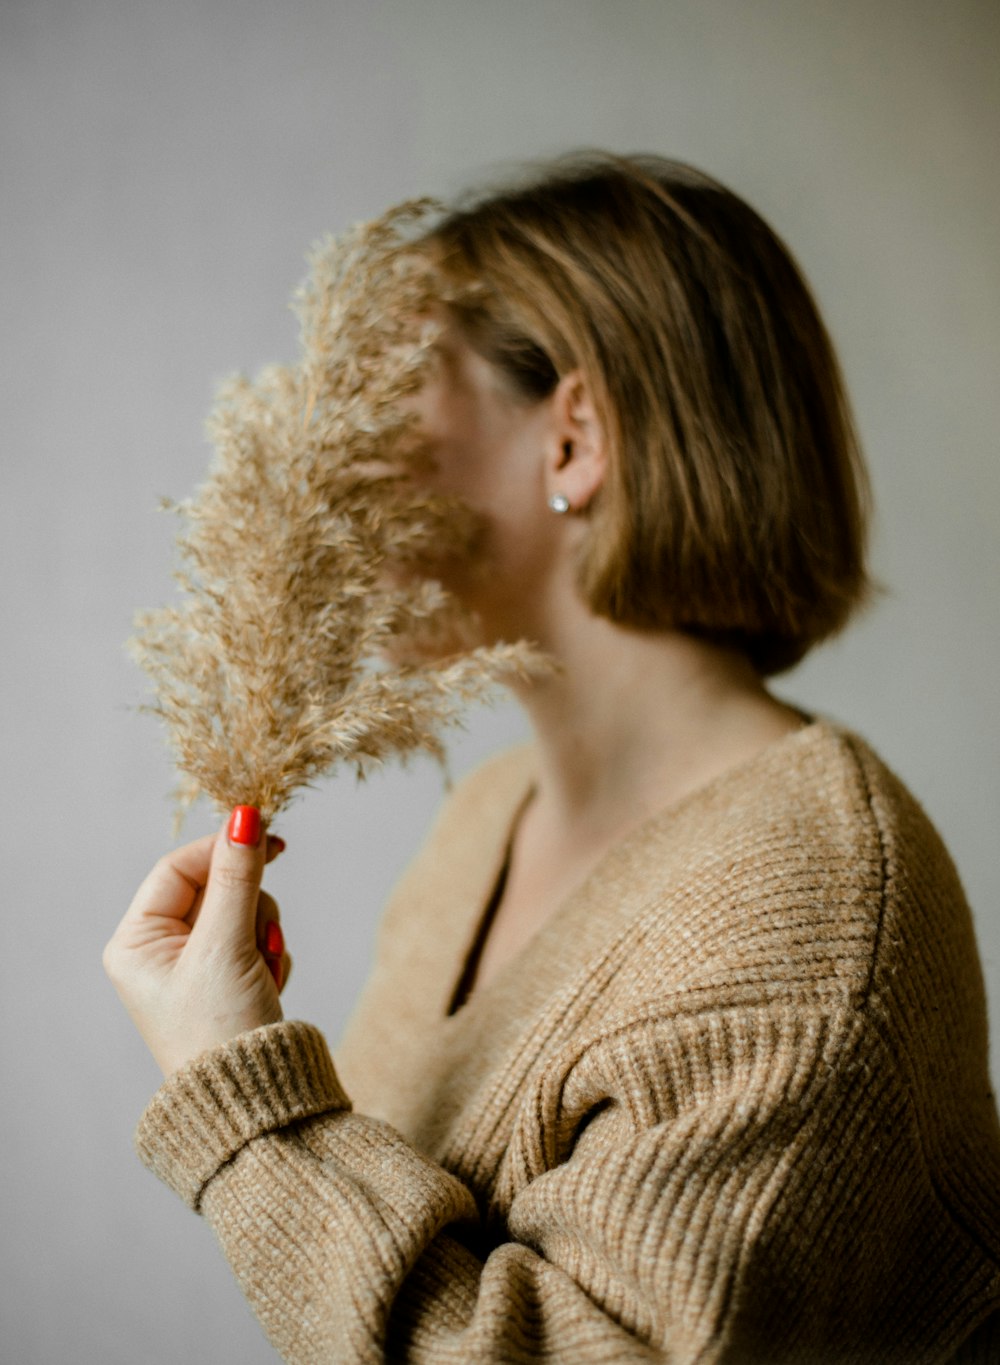 a woman holding a dried plant up to her face